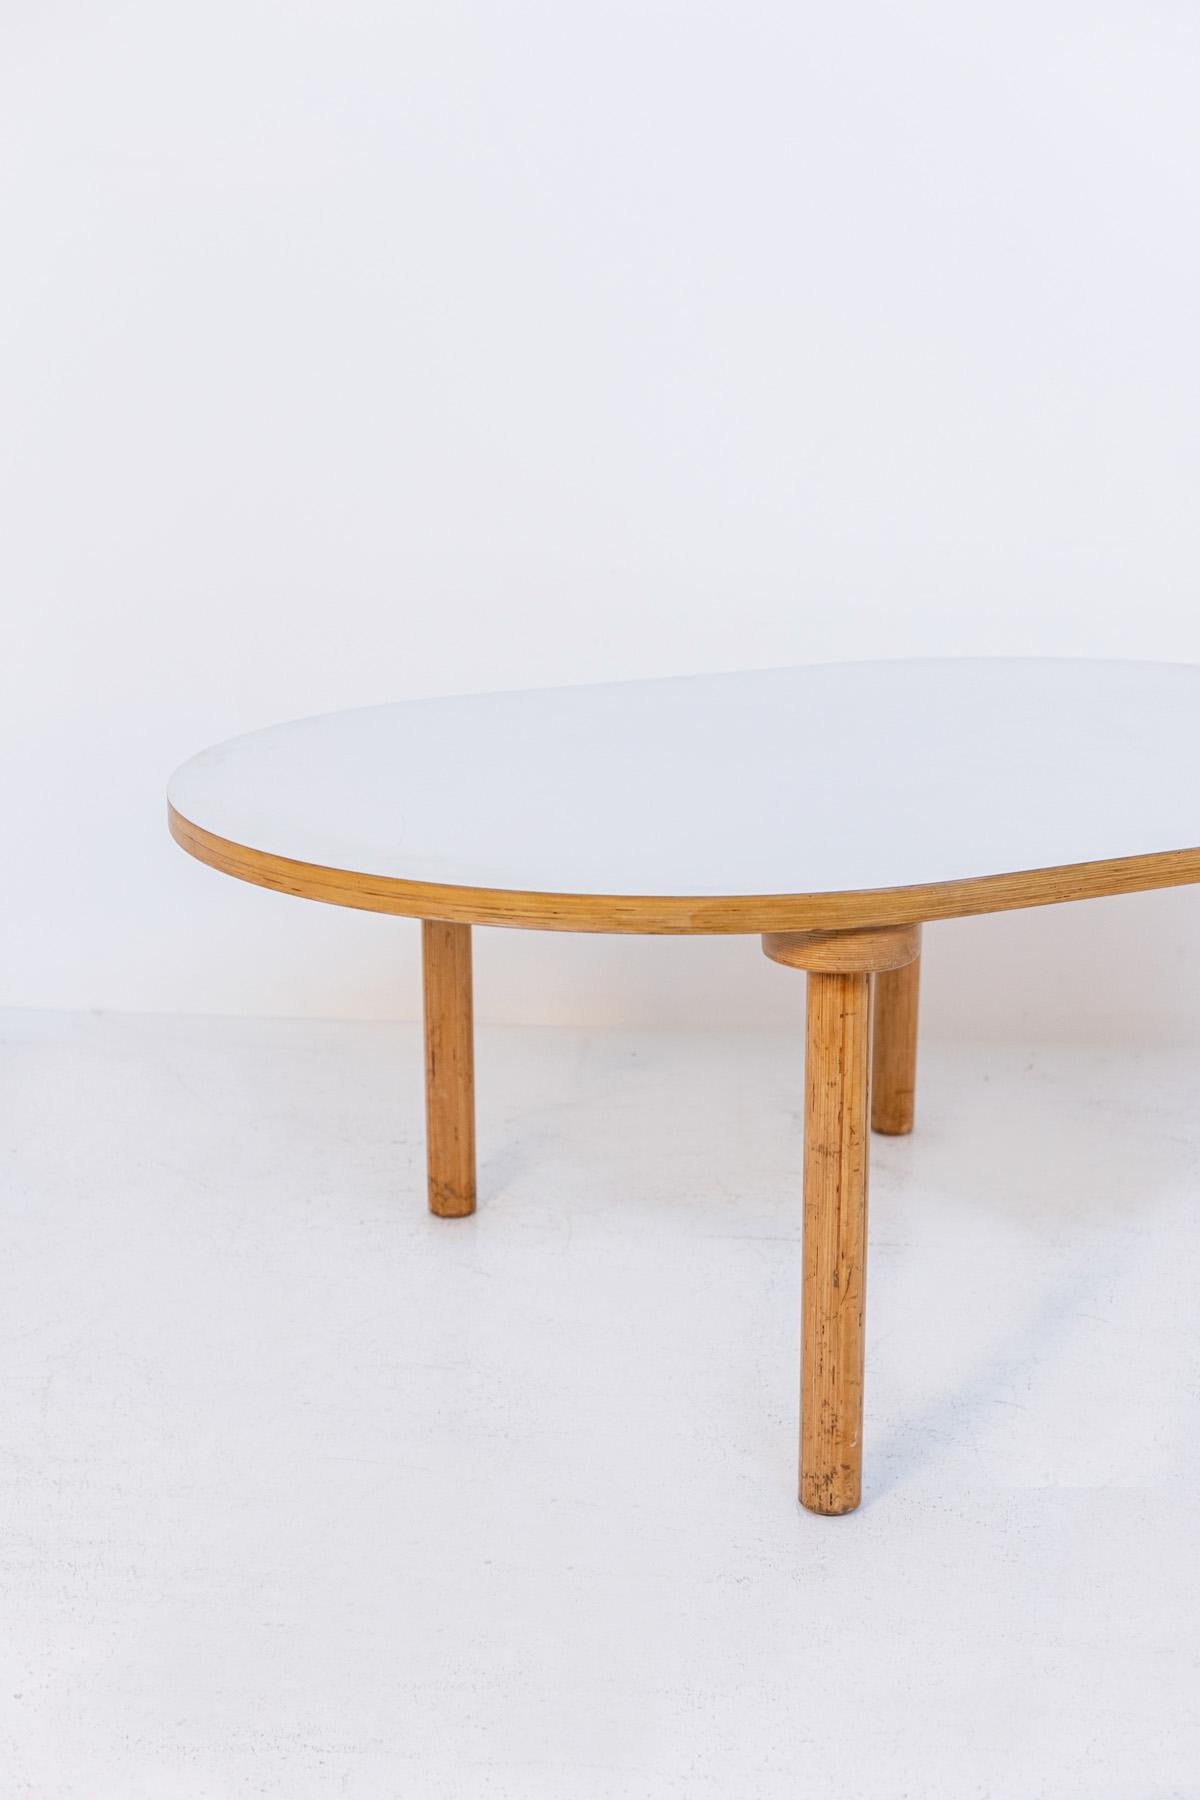 Important Vintage Table by Enzo Mari for Driade, 1970s For Sale 1